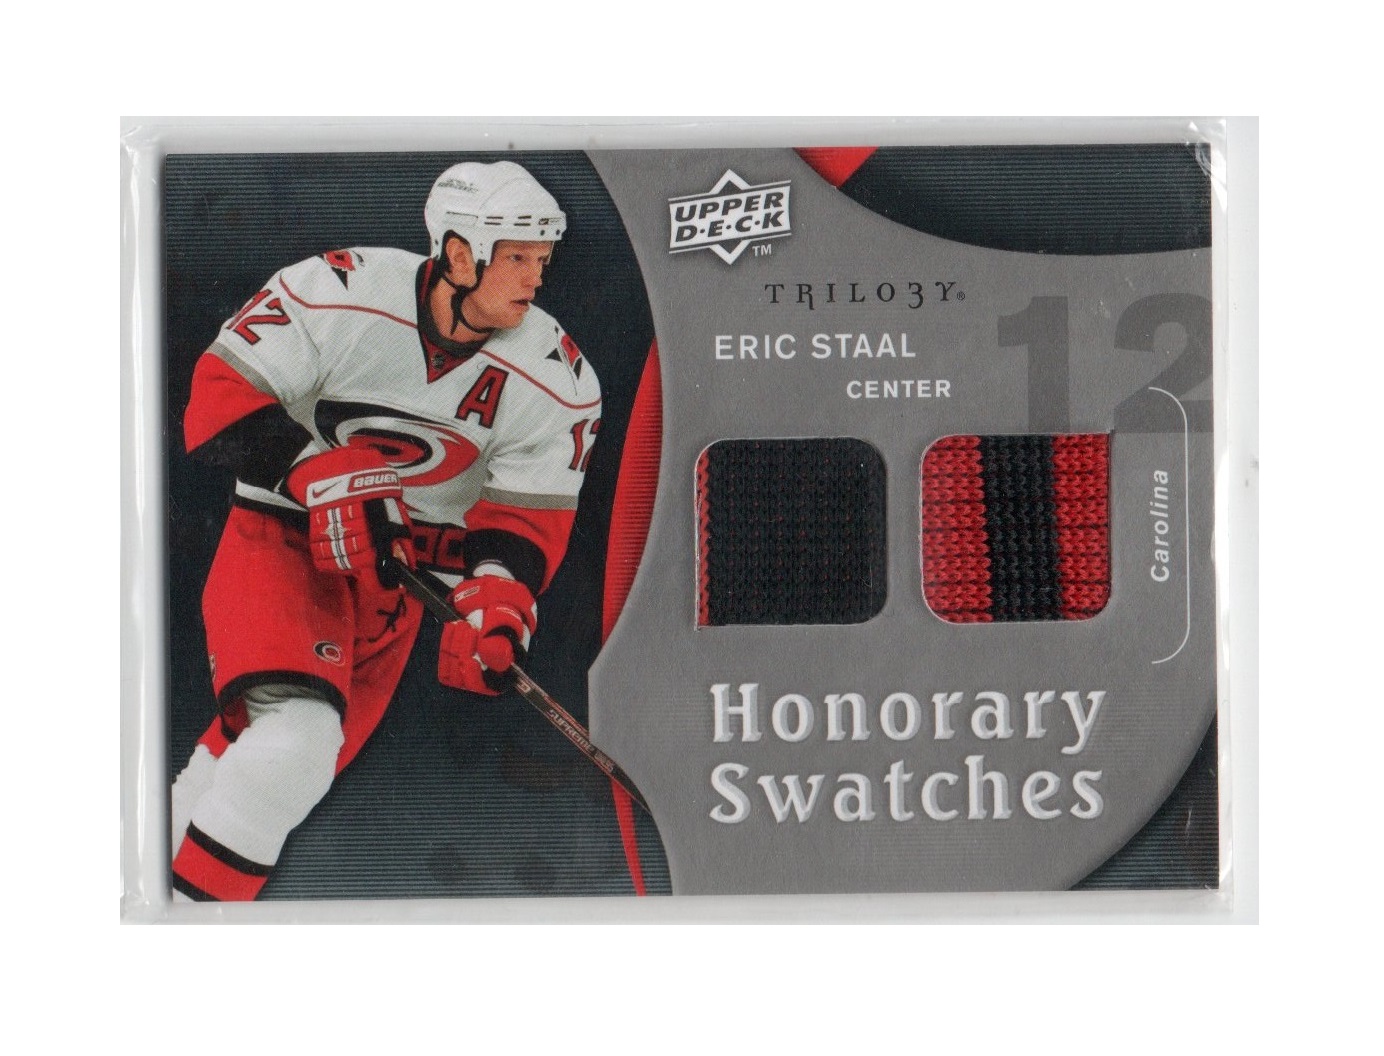 2009-10 Upper Deck Trilogy Honorary Swatches #HSES Eric Staal (40-X26-HURRICANES)